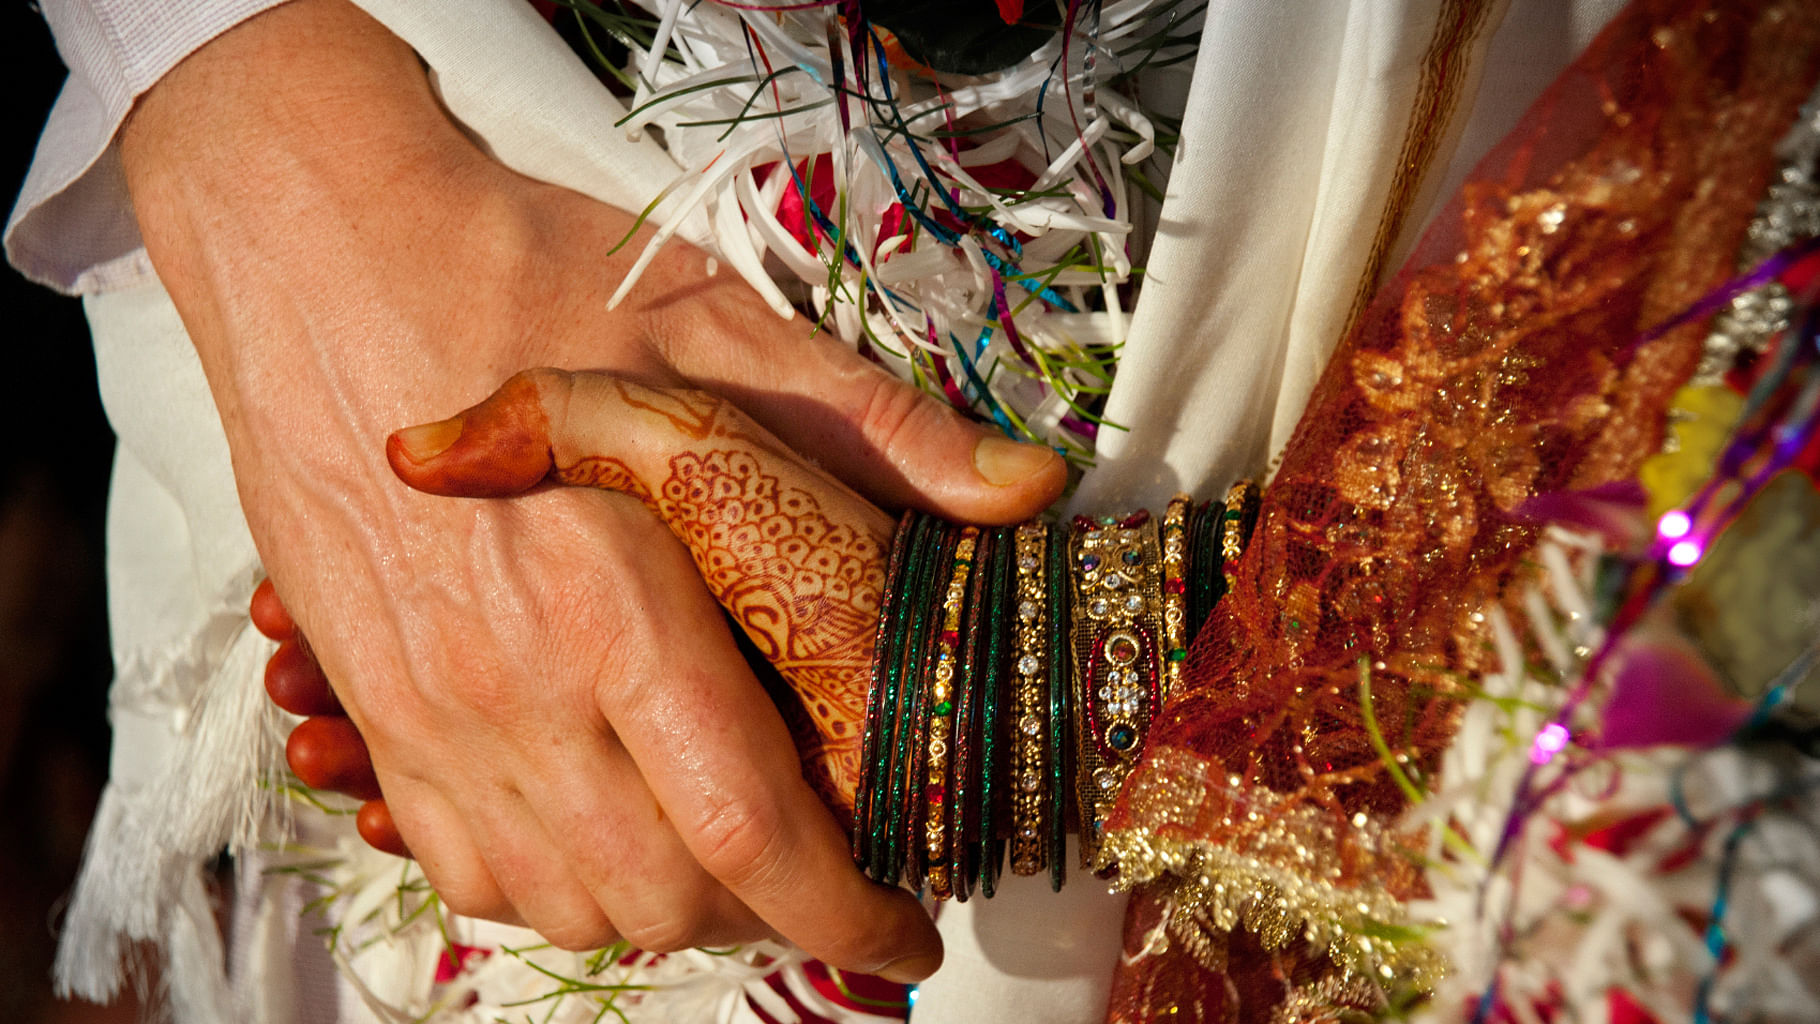 Matrimonial websites must only be for marriage, says the government. Not your annoying neighbour. (Photo: iStock) 